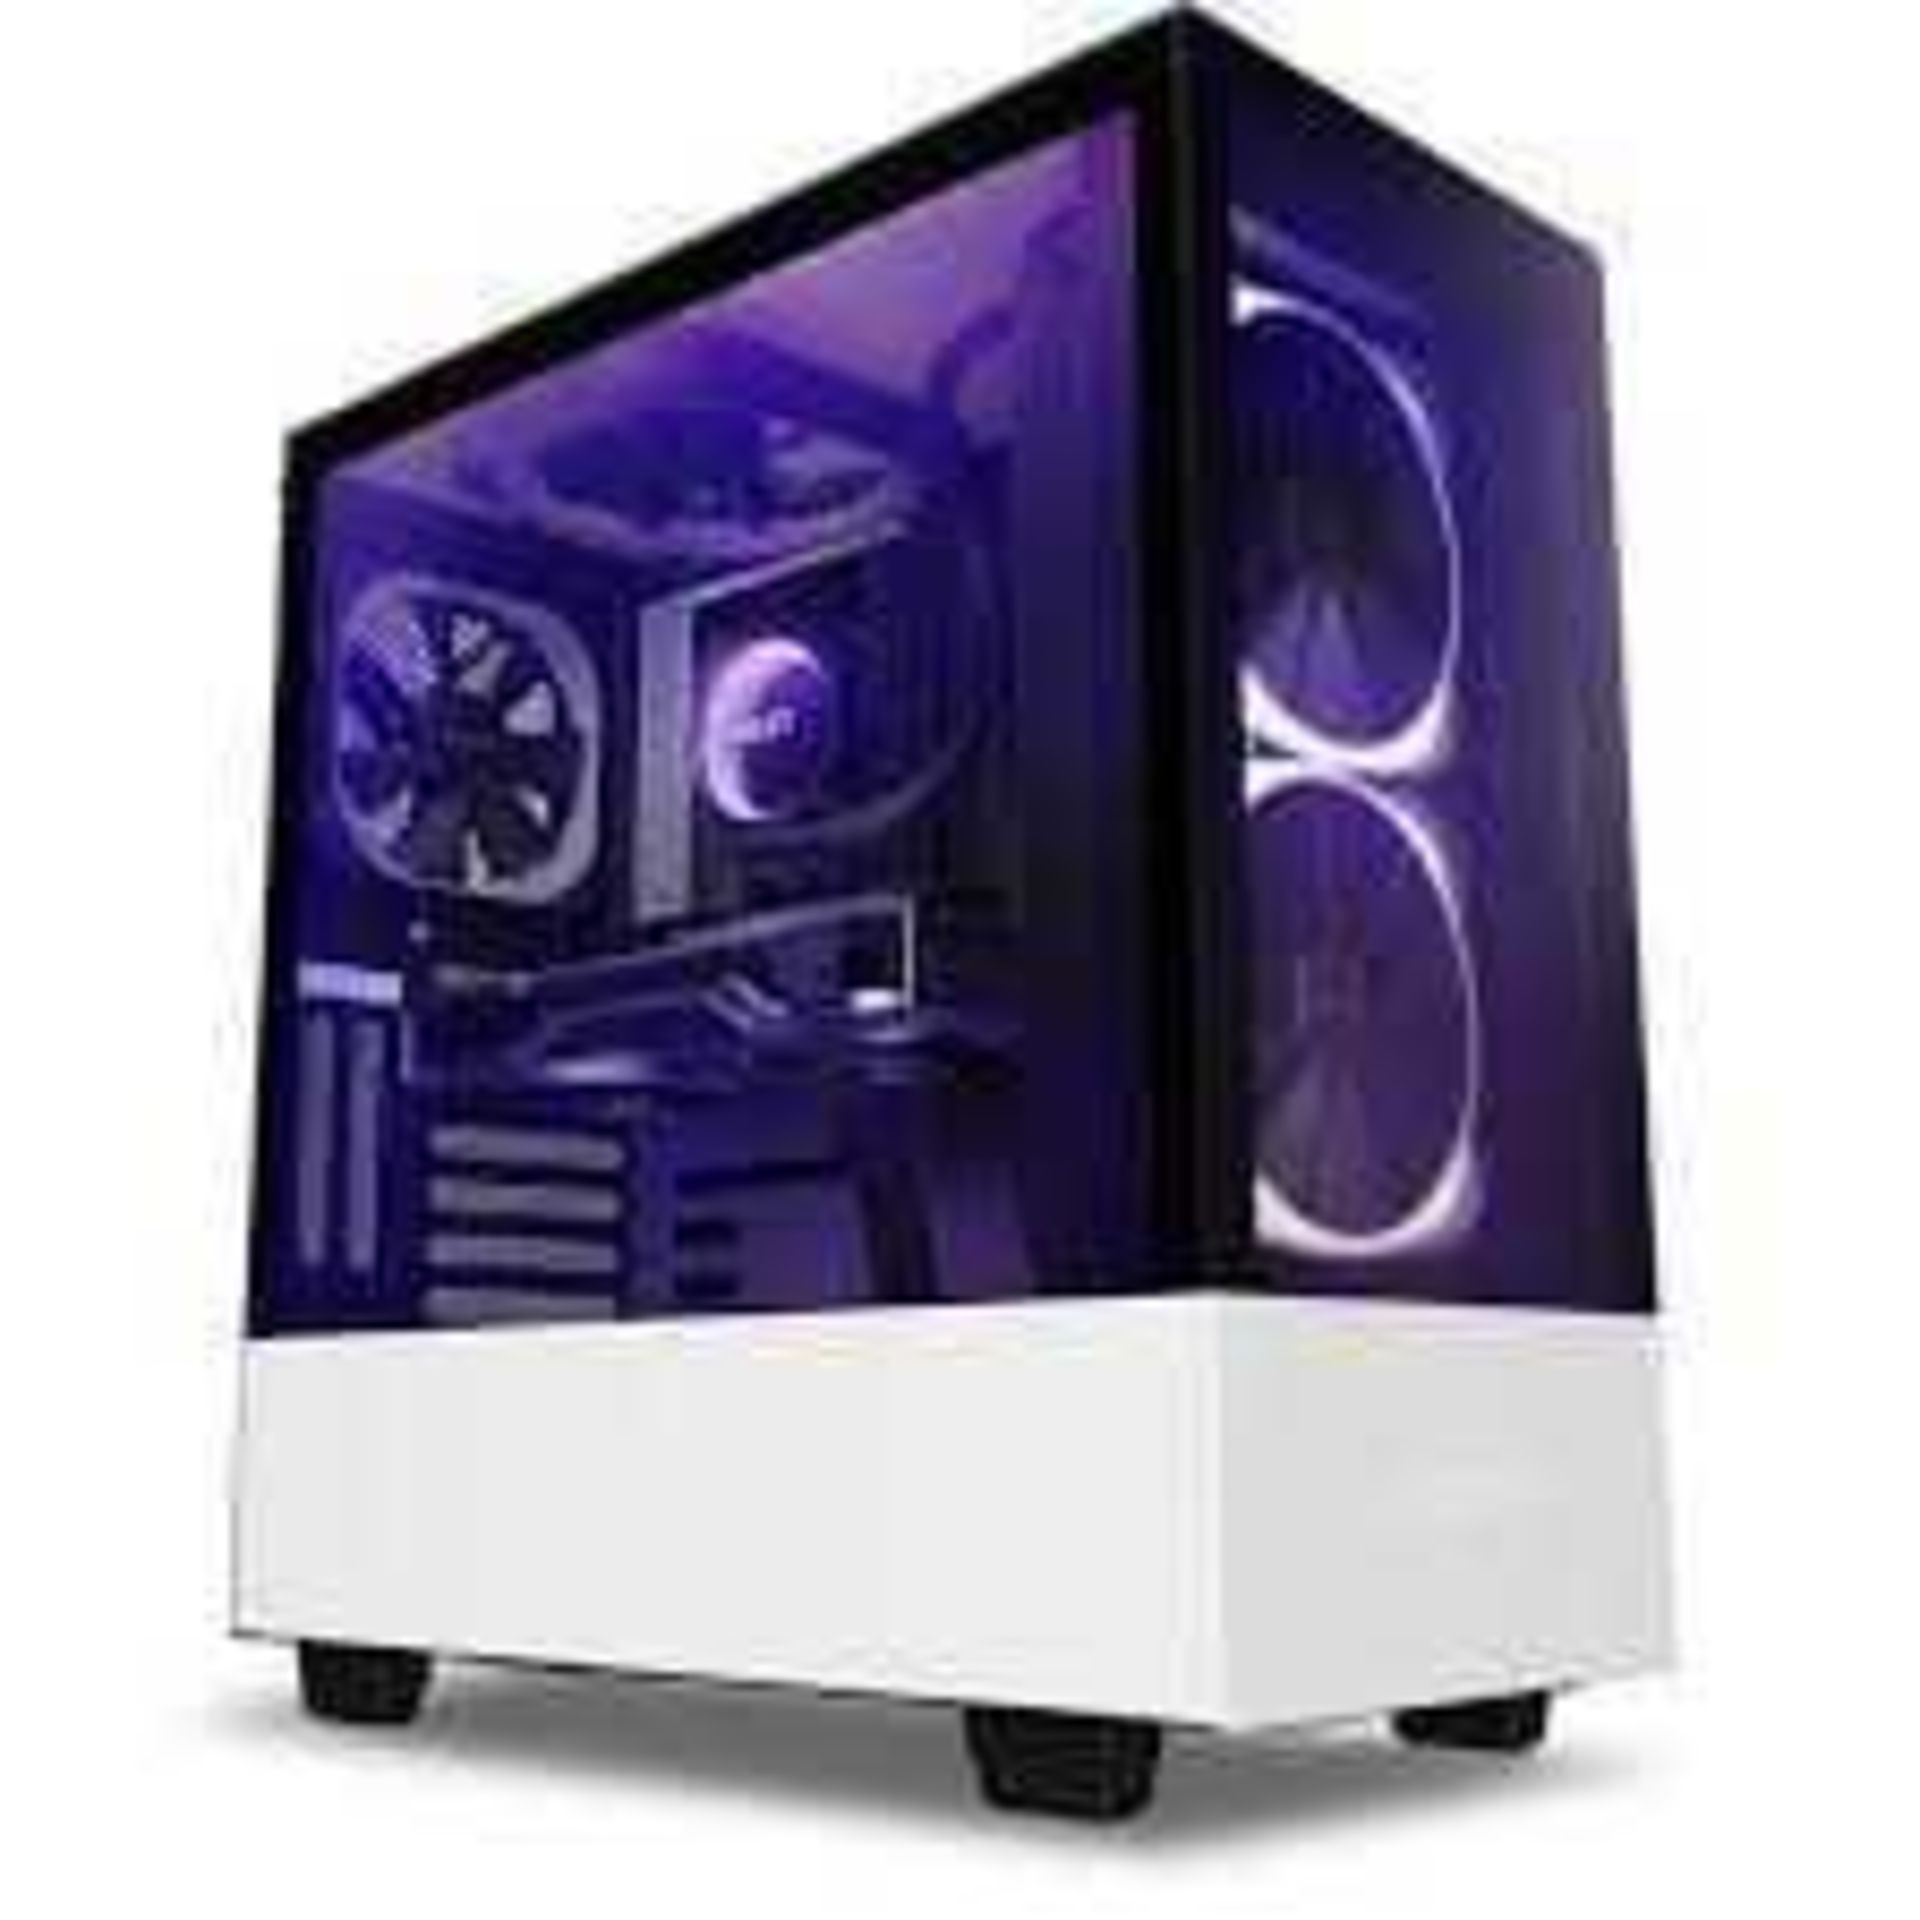 RRP £100 Boxed Nzxht510 Premium Compact Mid Tower Atx Case (Appraisals Available On Request) (